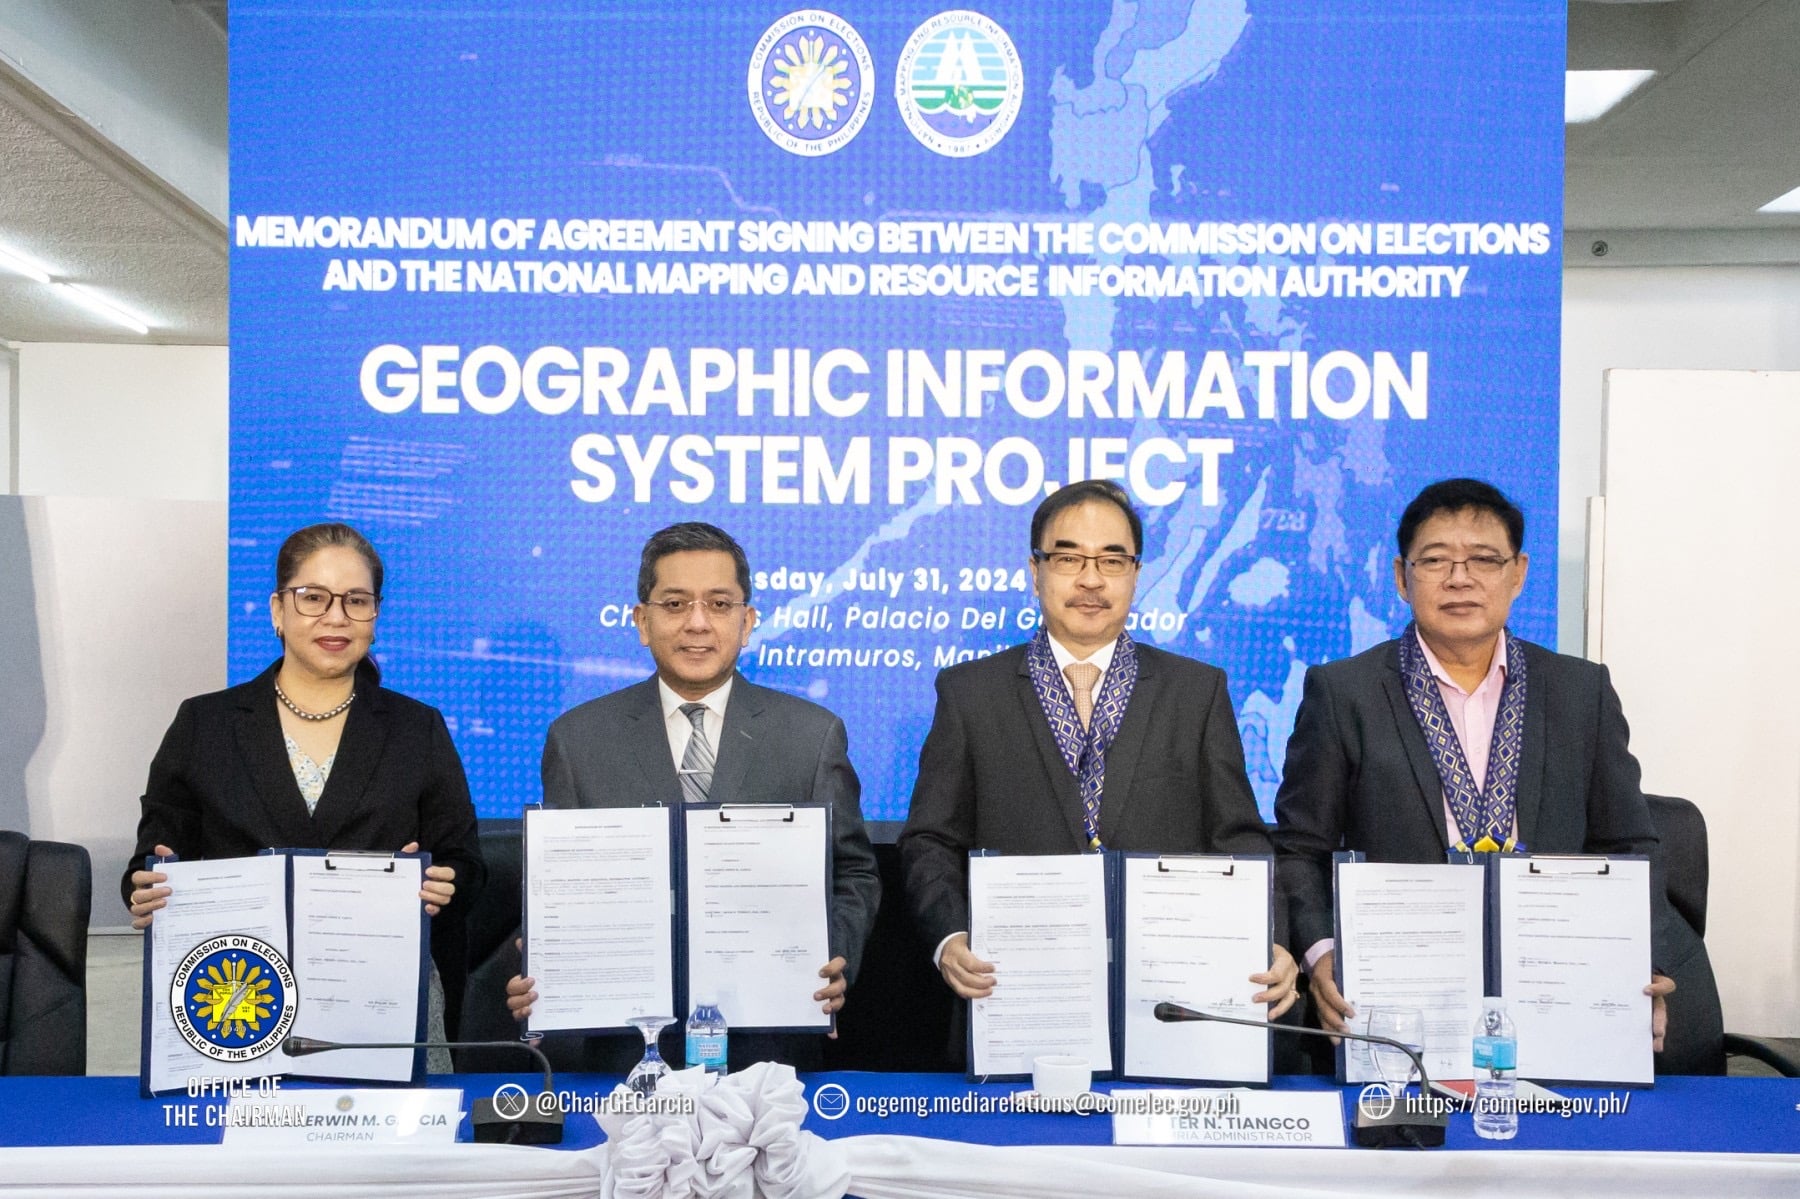 The Commission on Elections (Comelec) and National Mapping and Resource Information Authority (Namria) underscored the importance of using technology to ensure seamless and fair elections in a ceremonial signing of a memorandum of agreement on Wednesday.